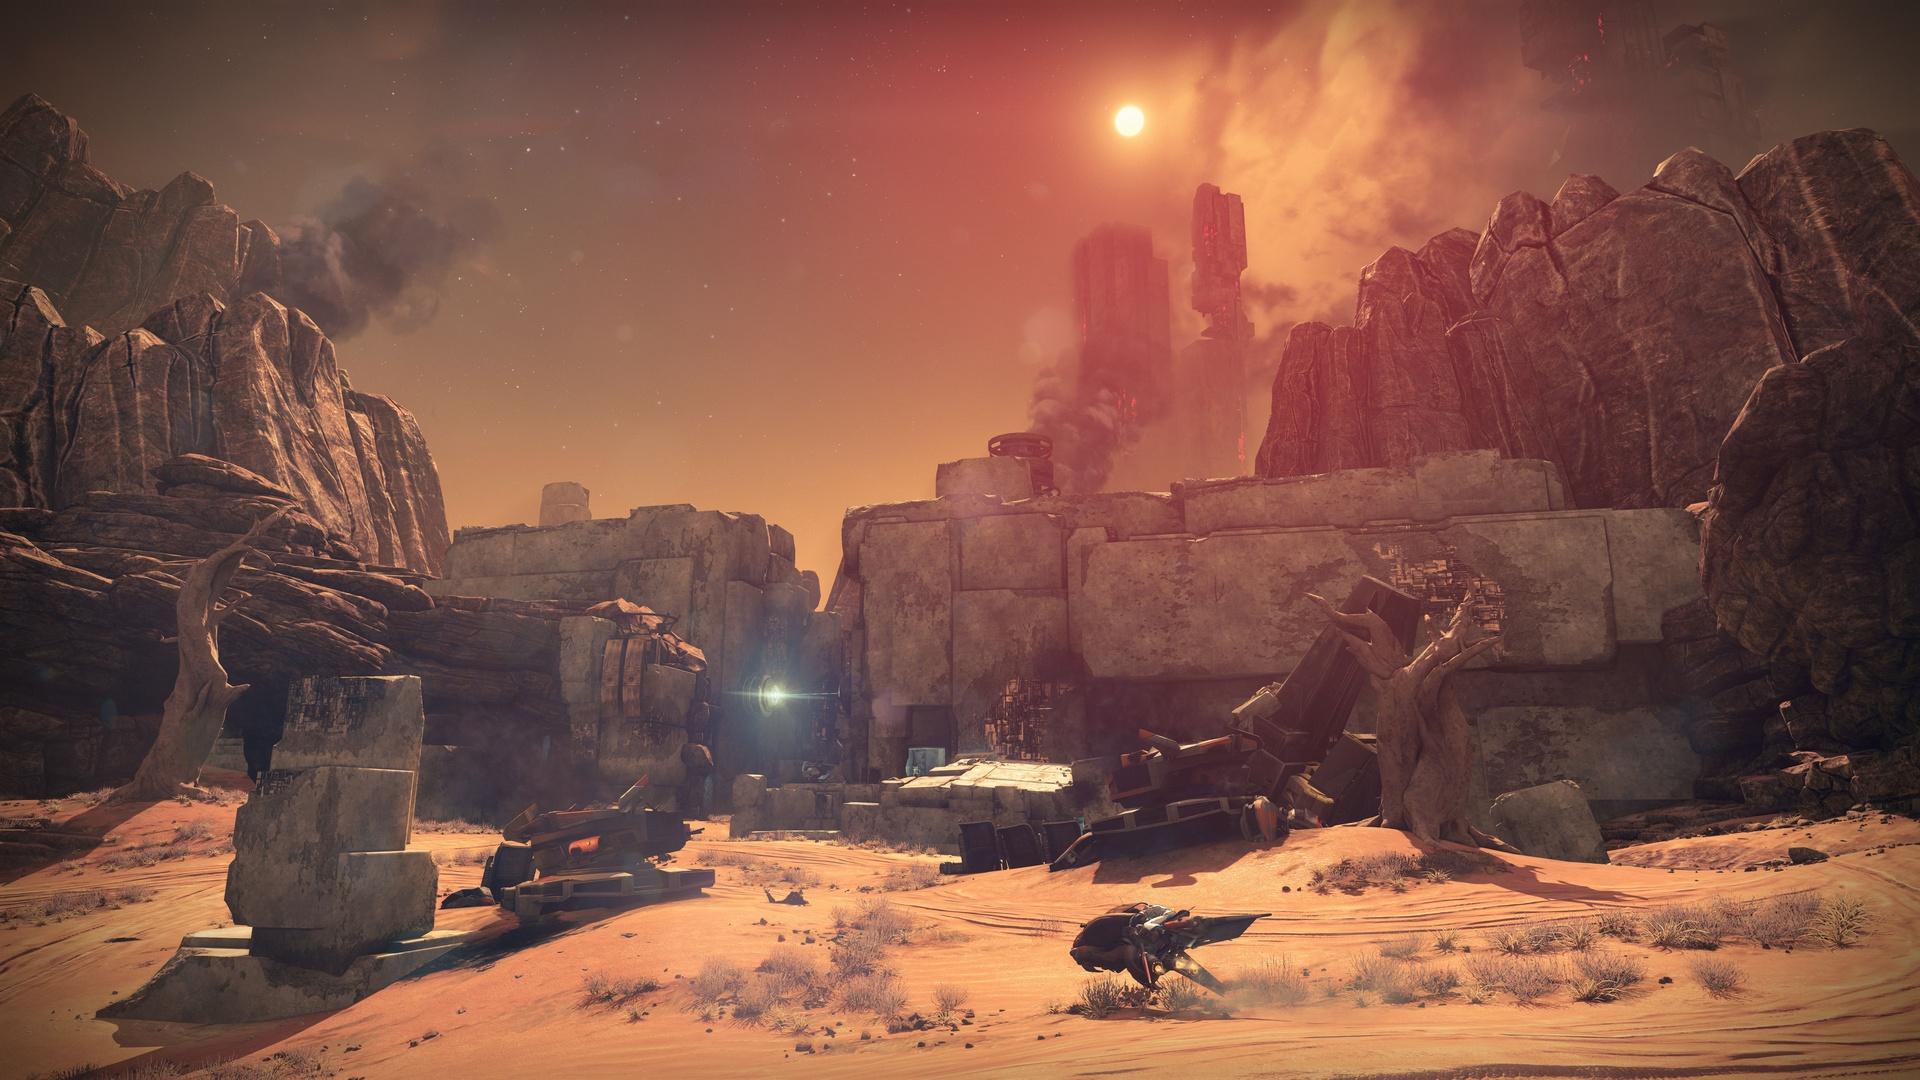 Bungie Talks the Future of Destiny and Cooperative Multiplayer